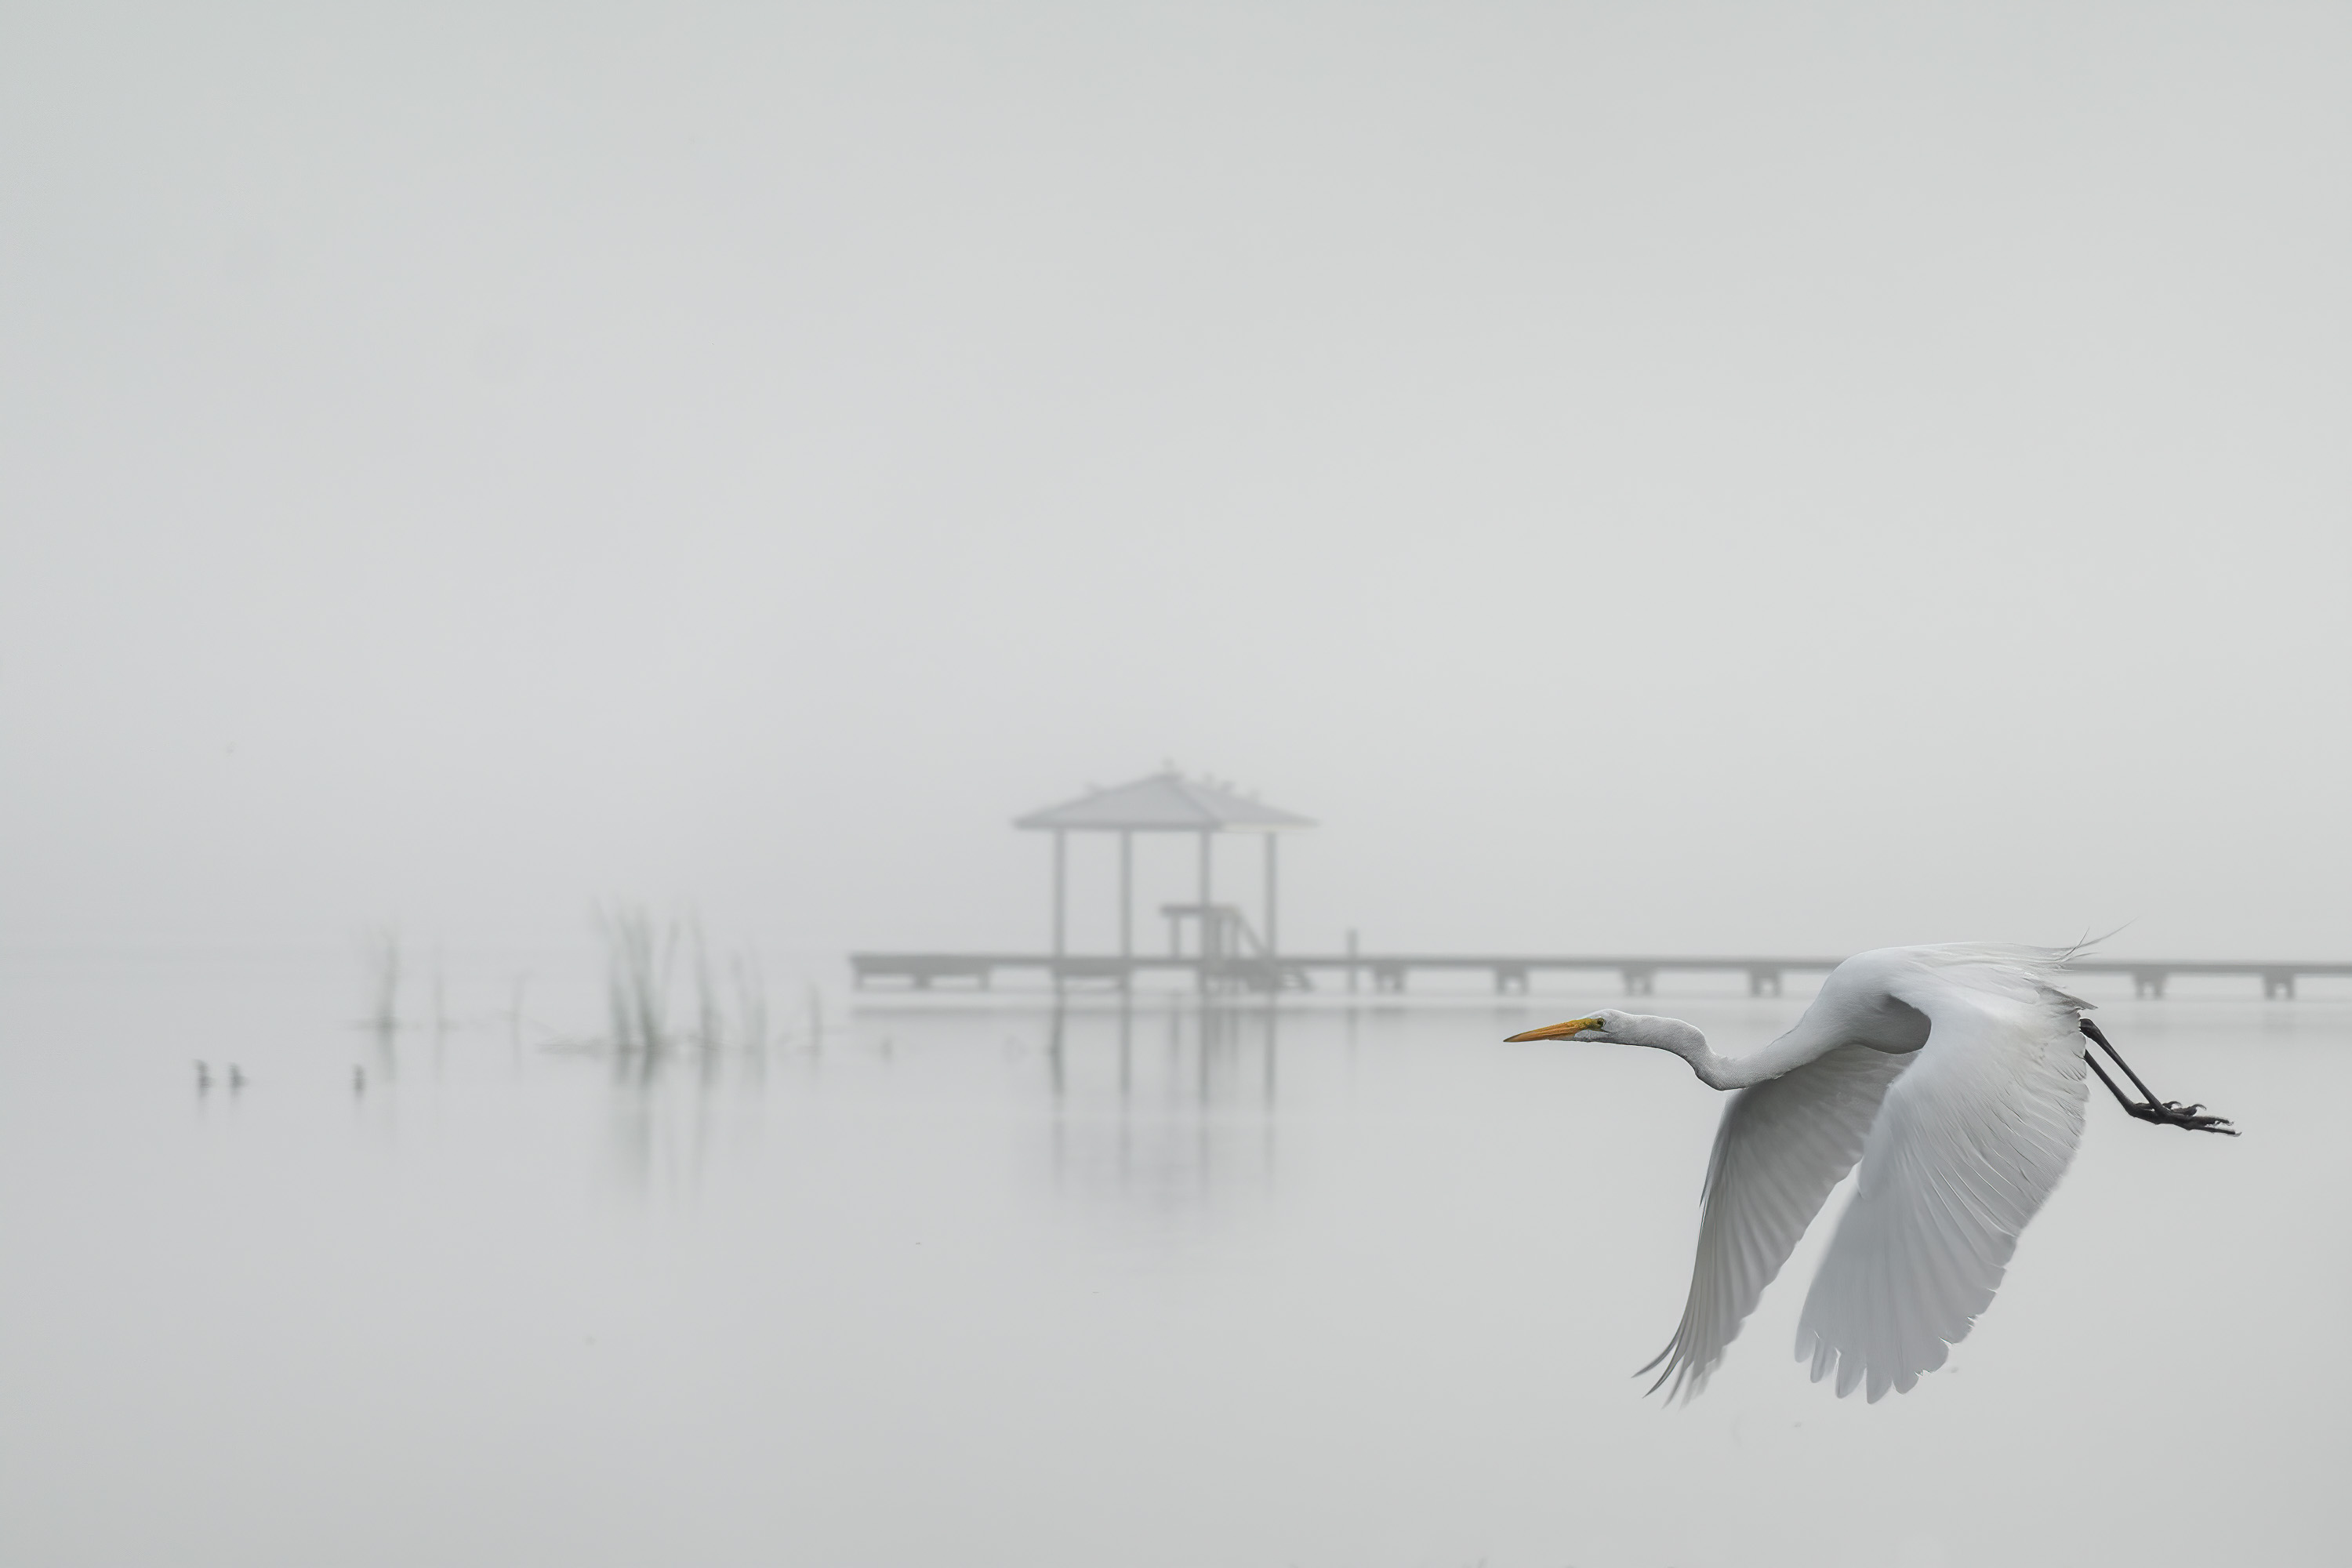 A white bird in flight over a foggy lake